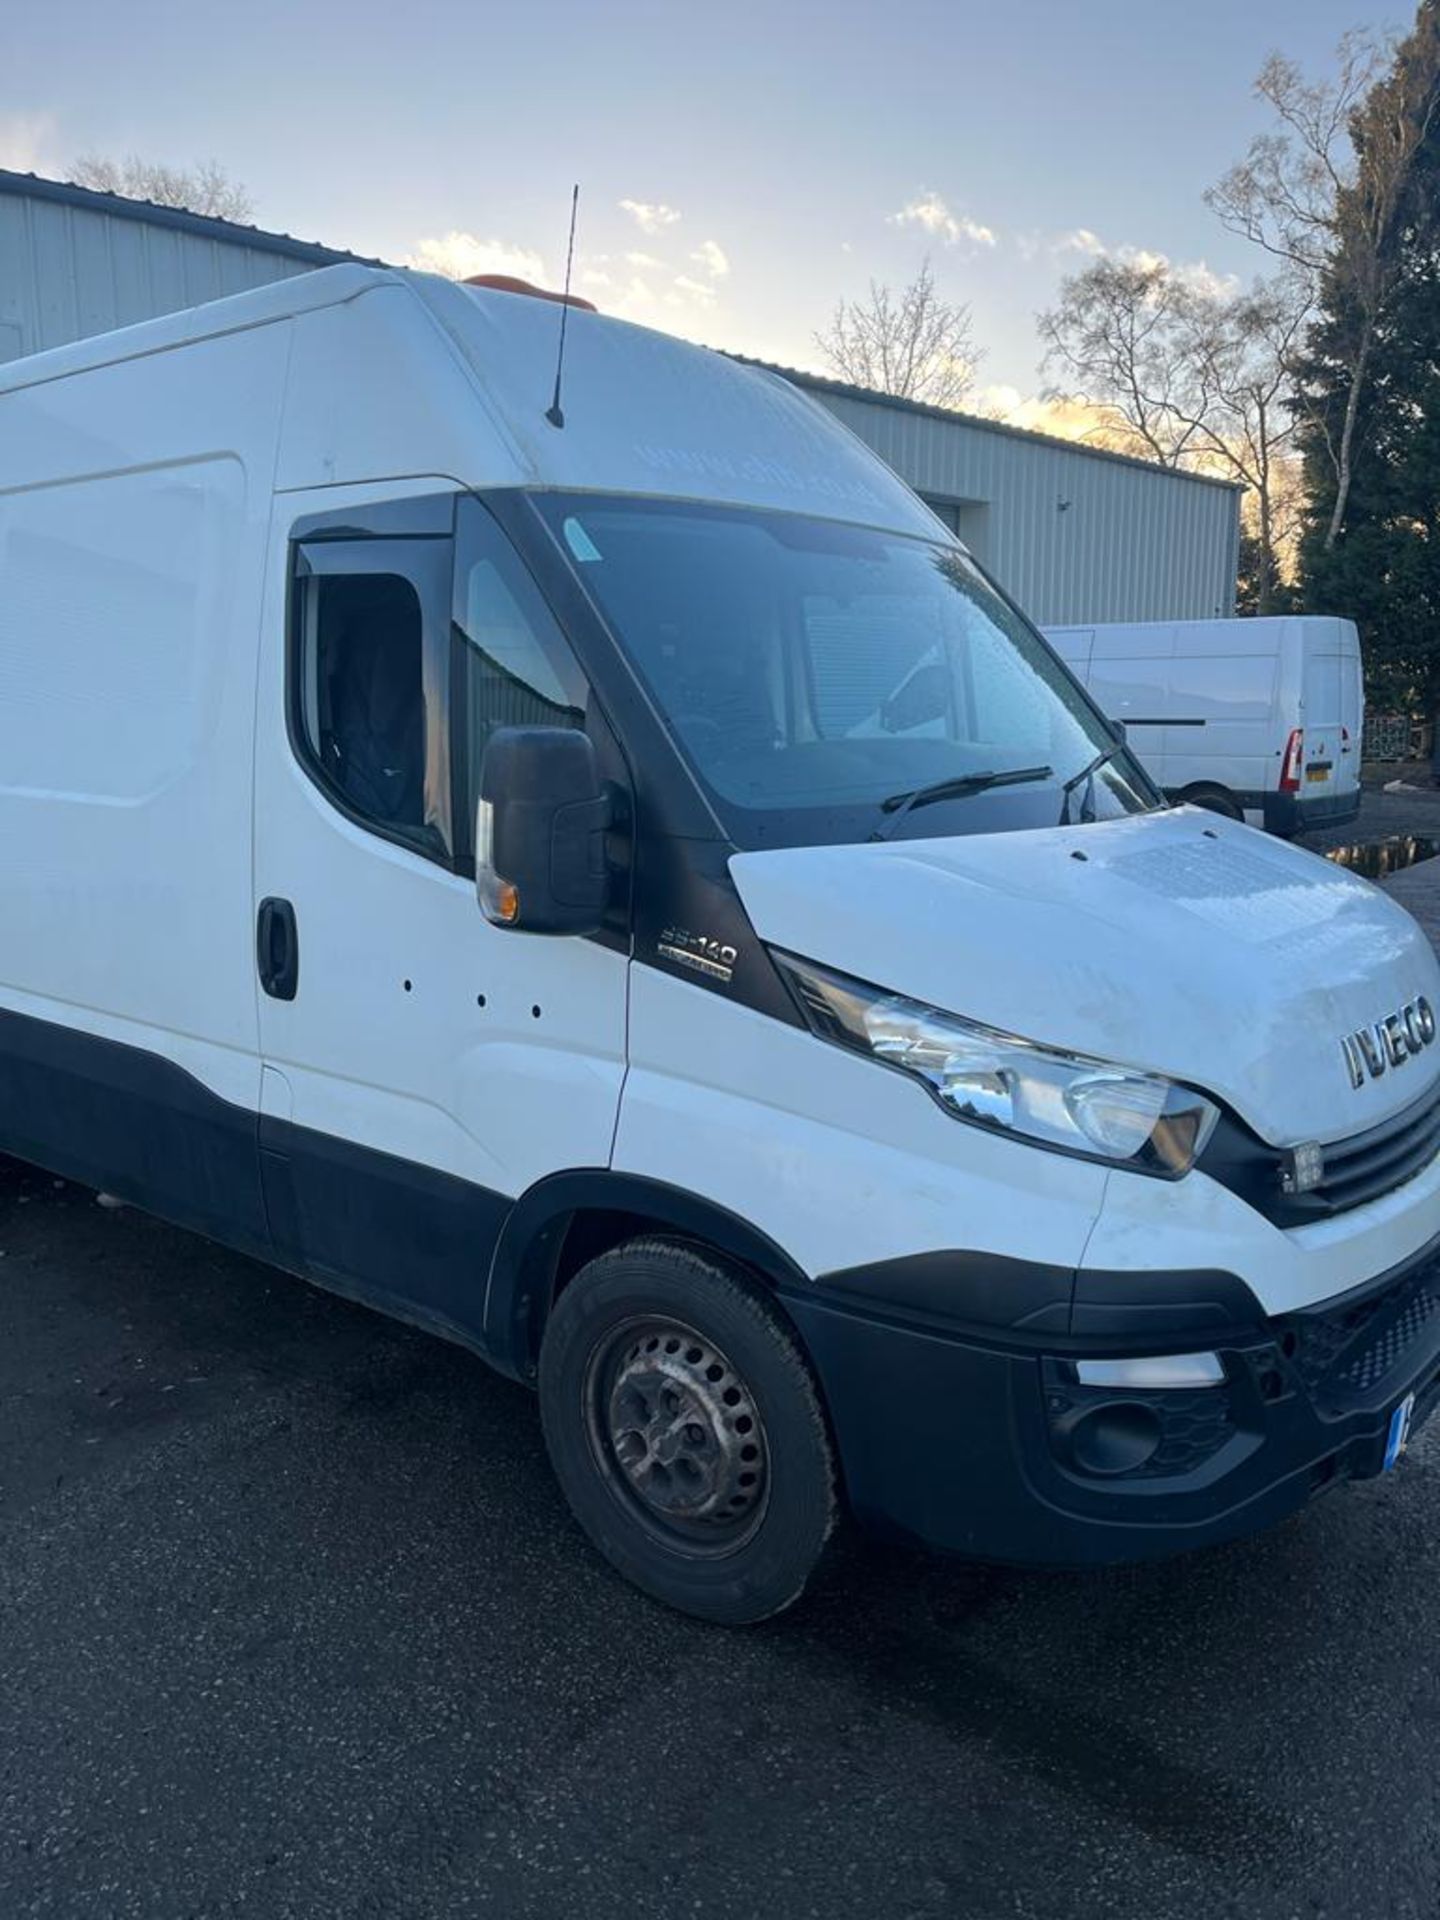 2017 Iveco daily mwb workshop van - Pto driven arc welder and 110v plug and 12v and 24v jump point